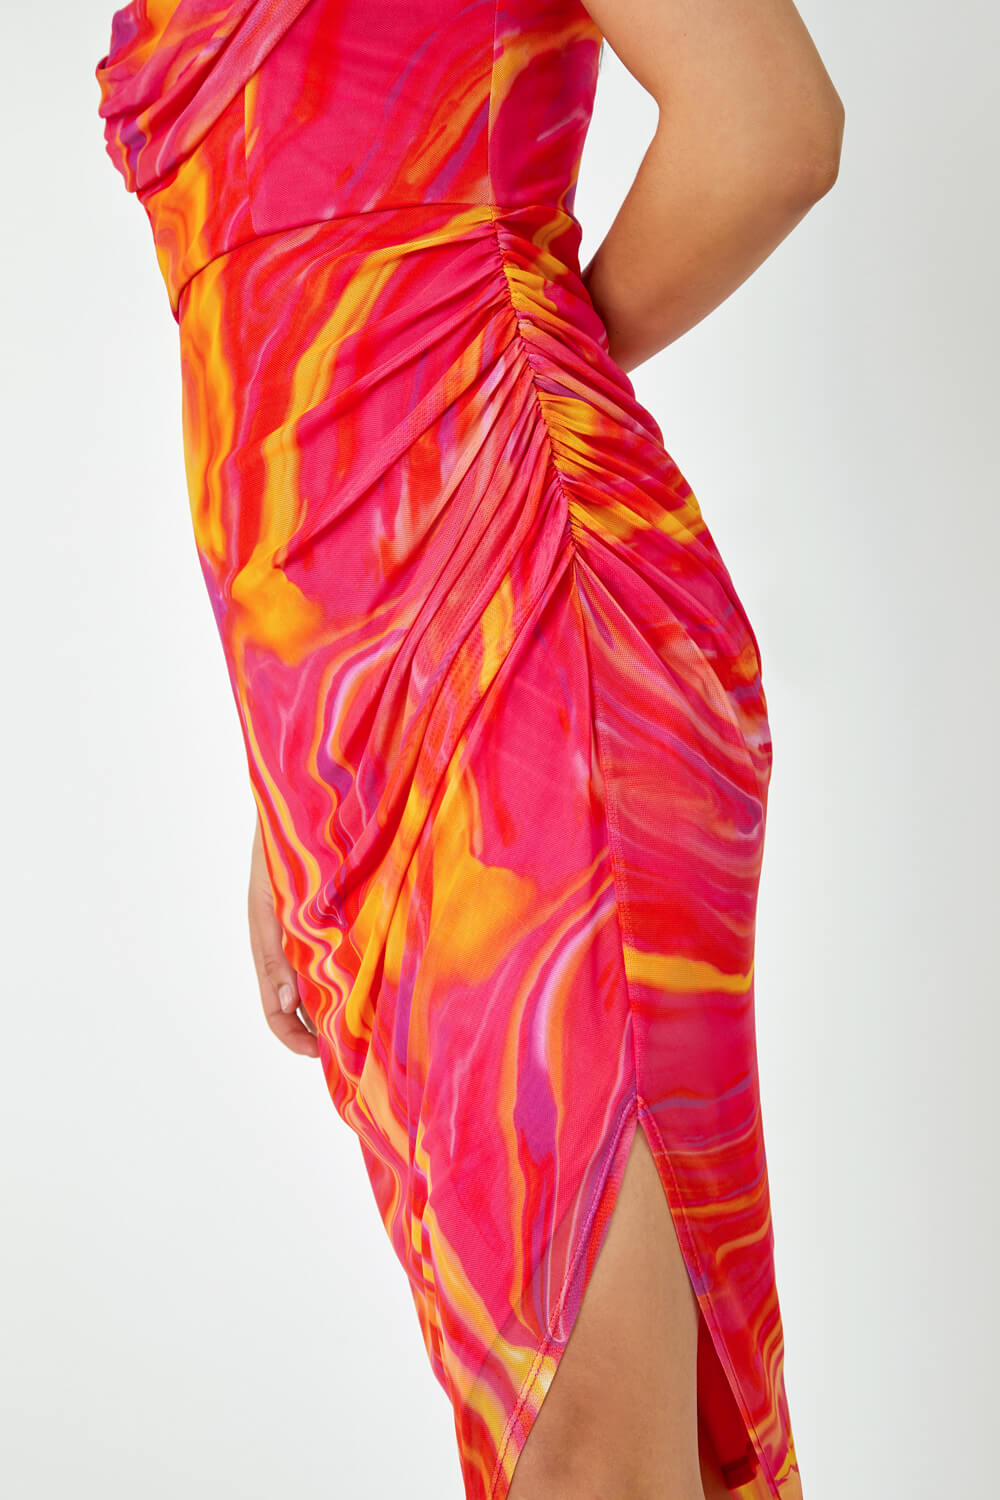 PINK Swirl Print Ruched Stretch Dress, Image 5 of 5